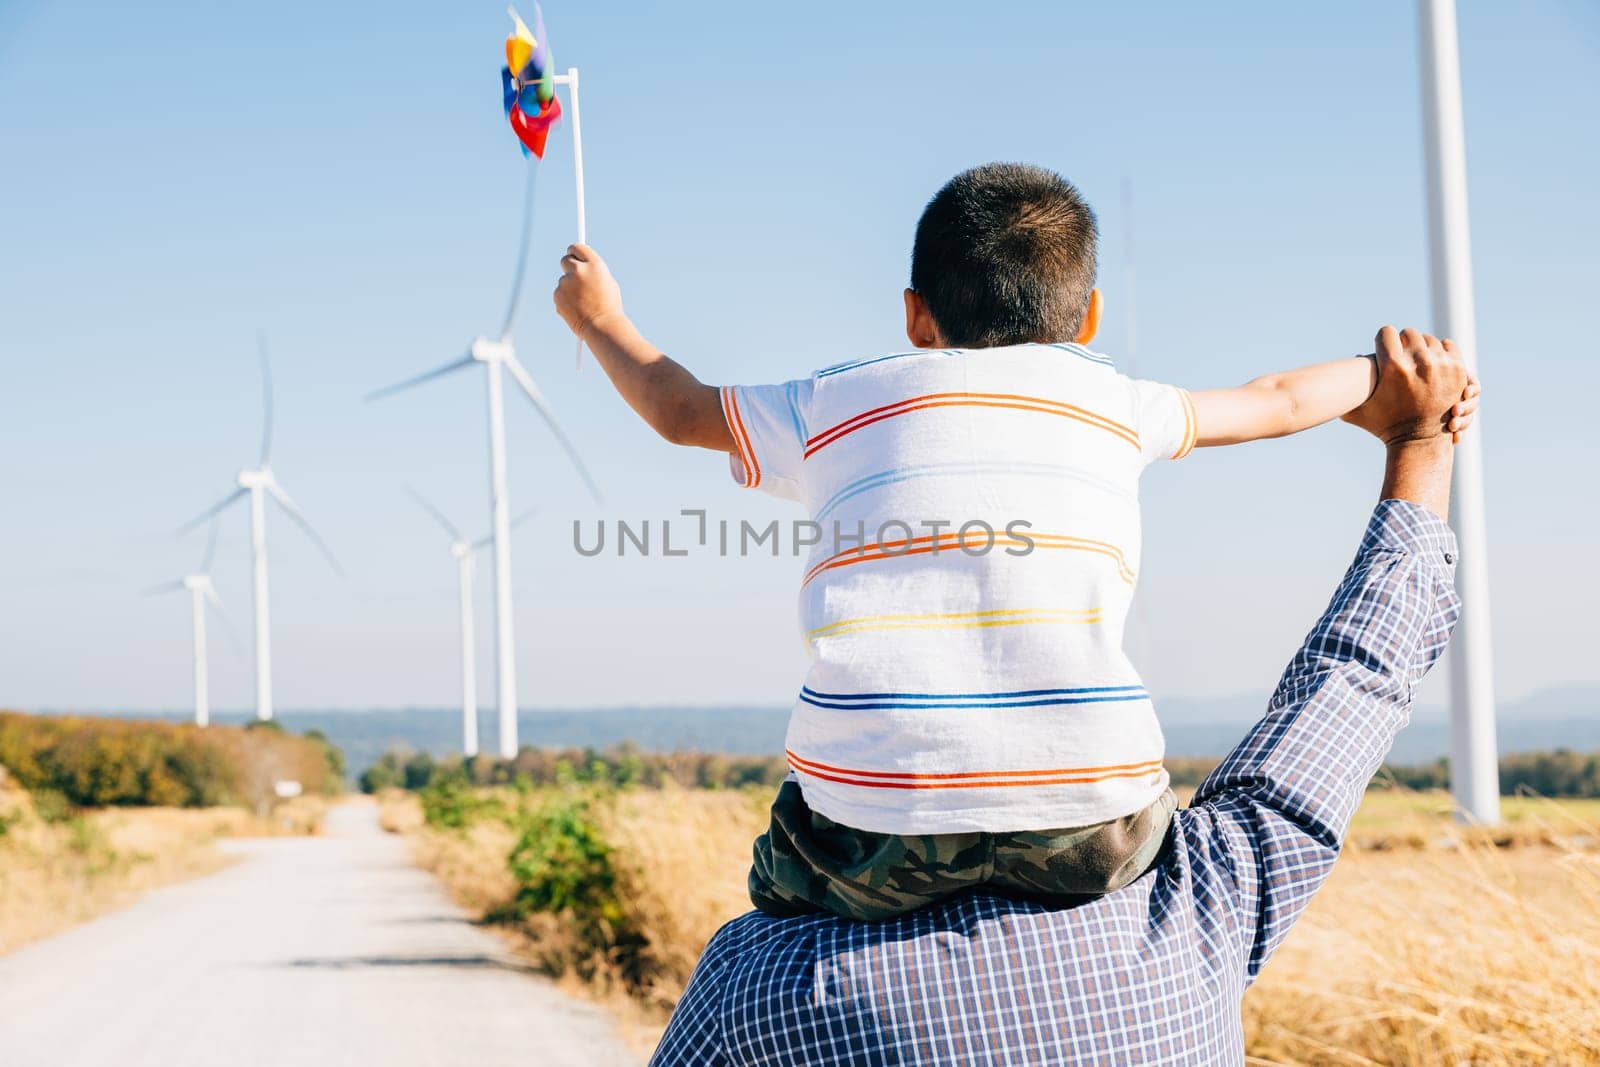 Father smiles carrying daughter with pinwheel. Family joy near windmills embodies global innovation in renewable energy. A bonding moment filled with happiness and community. Father Day